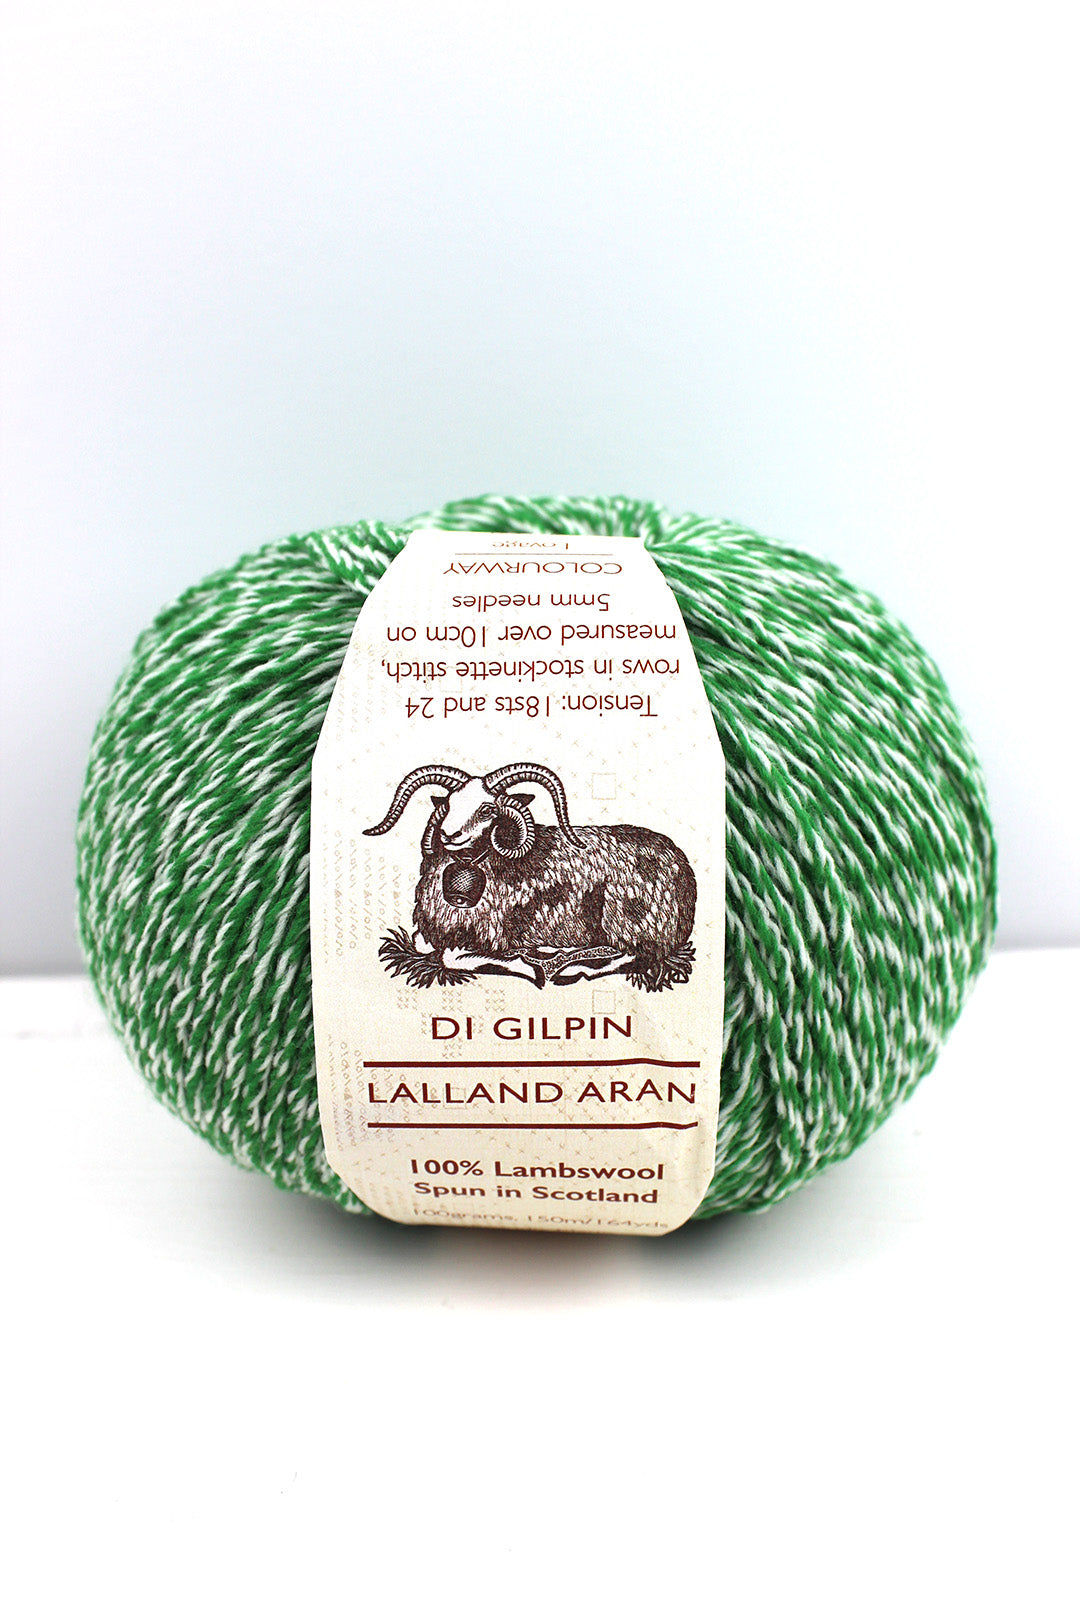 Aran weight wool inspired by the green hues in the leaves of a lovage plant.